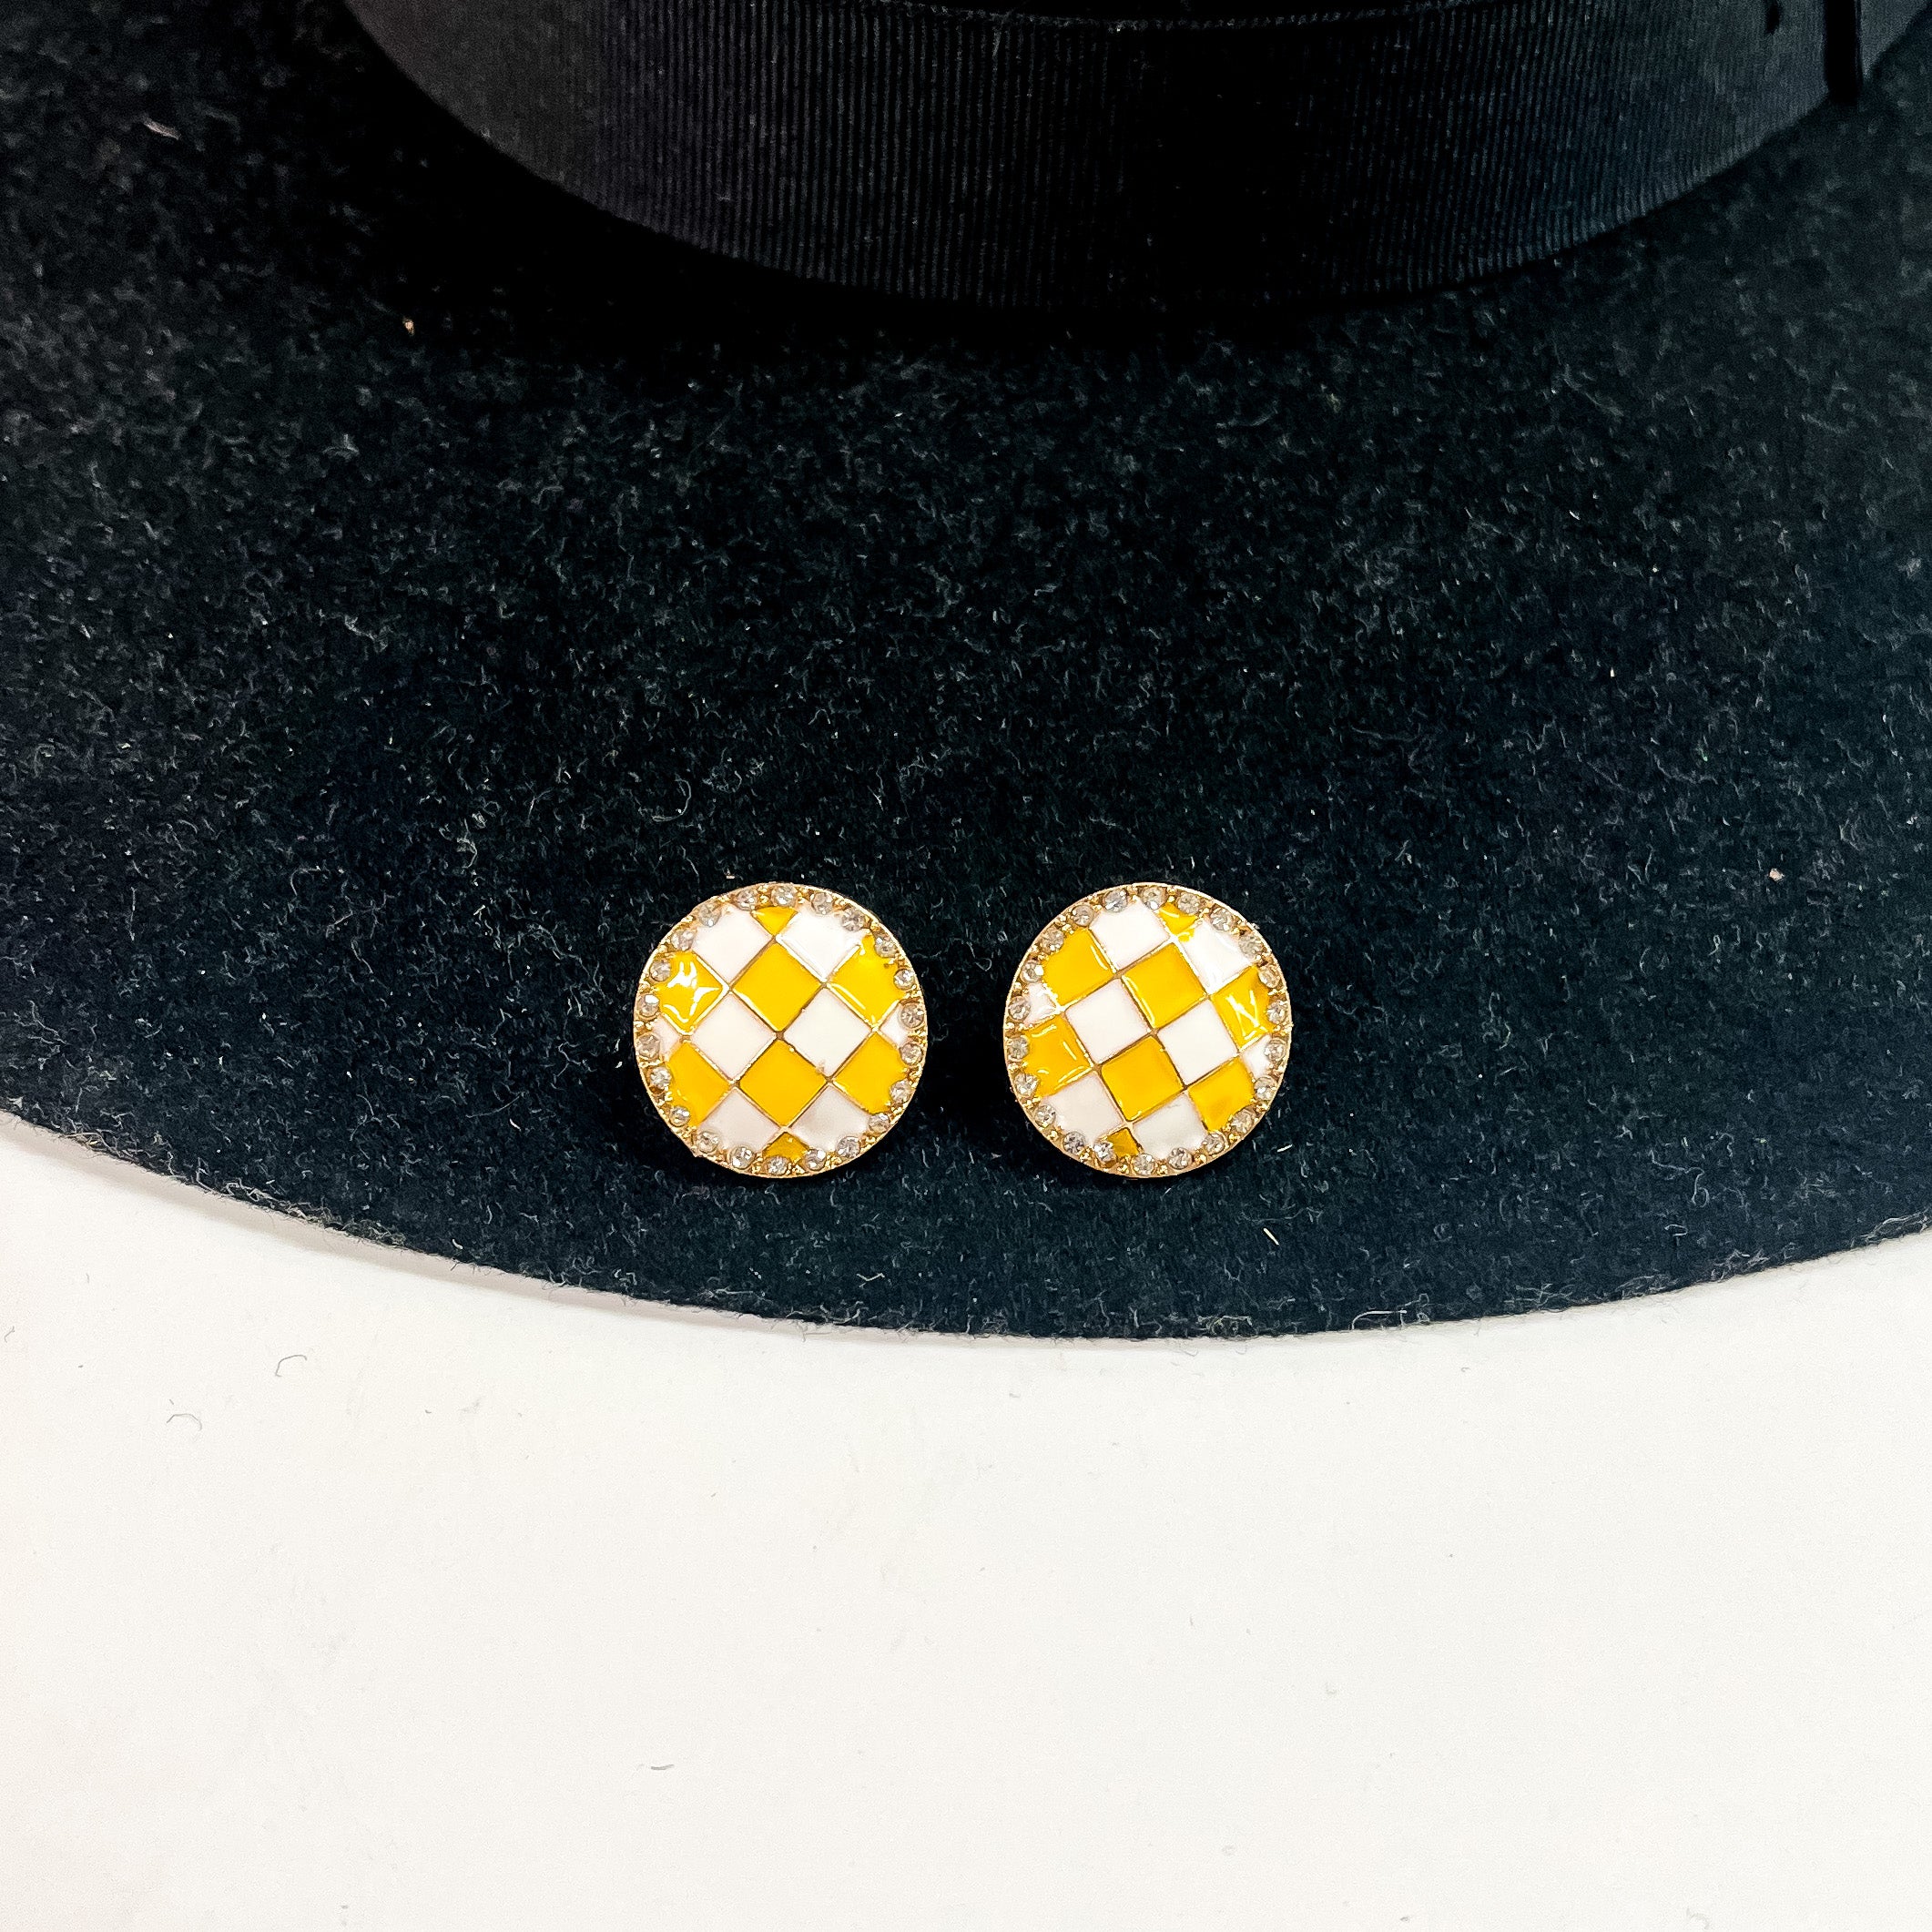 This is a pair of checkered patterned stud earrings in white/yellow in a gold  setting with clear crystals all around. This pair of earrings is laying on a  black felt hat brim and on a white background.